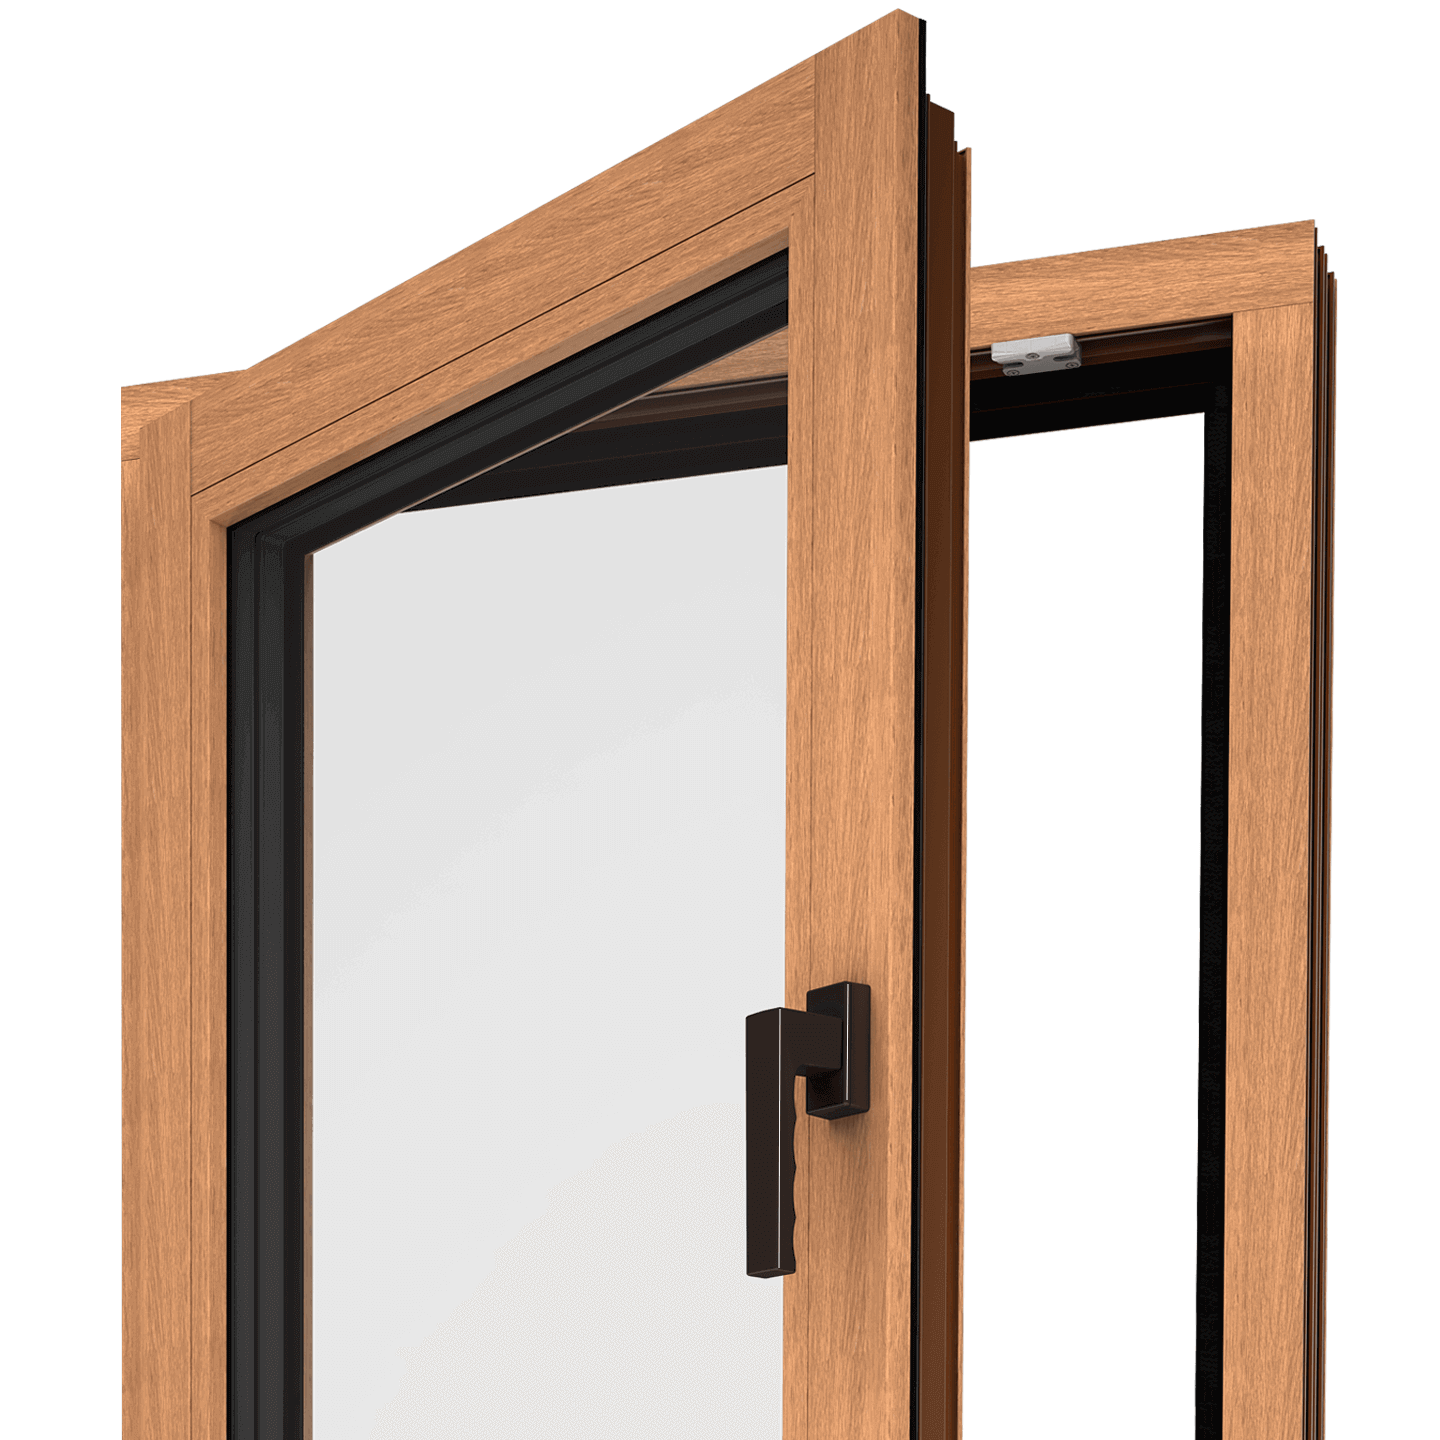 A Wood Look window that resembles a traditional wood window.